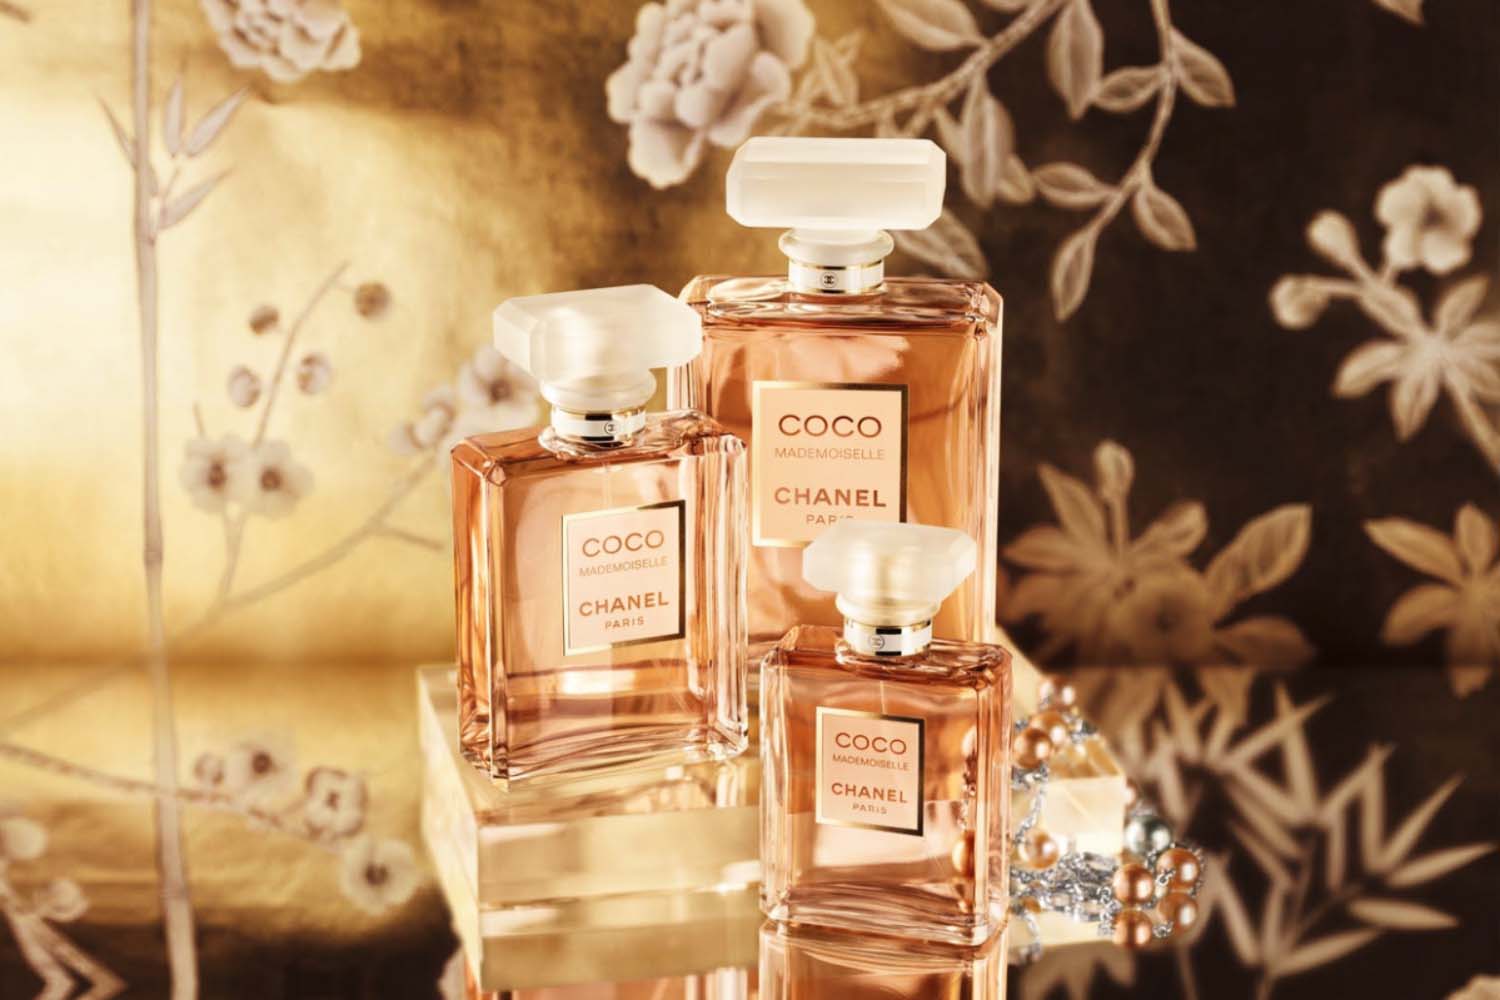 Chanel's new coco mademoiselle creation is here, and this is what